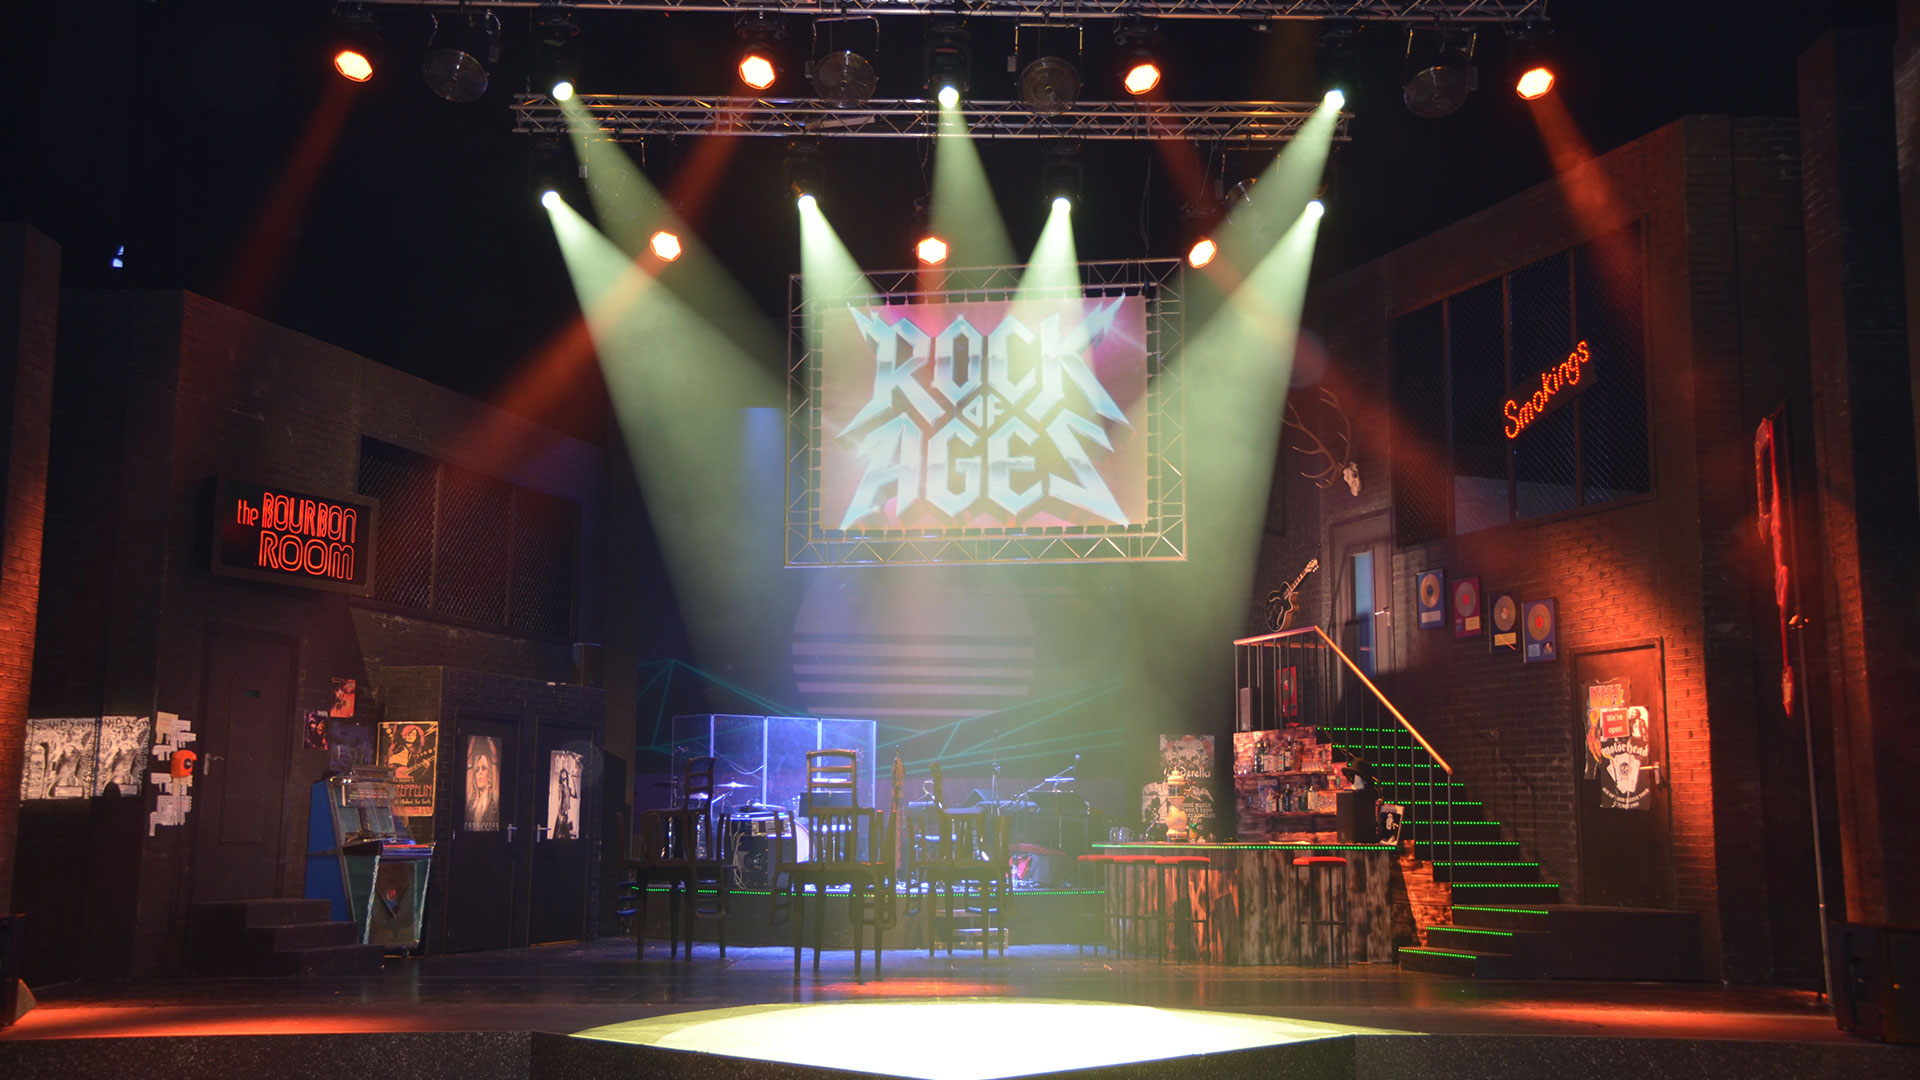 Theater-Ulm_Rock_of_Ages_P18_1.jpg